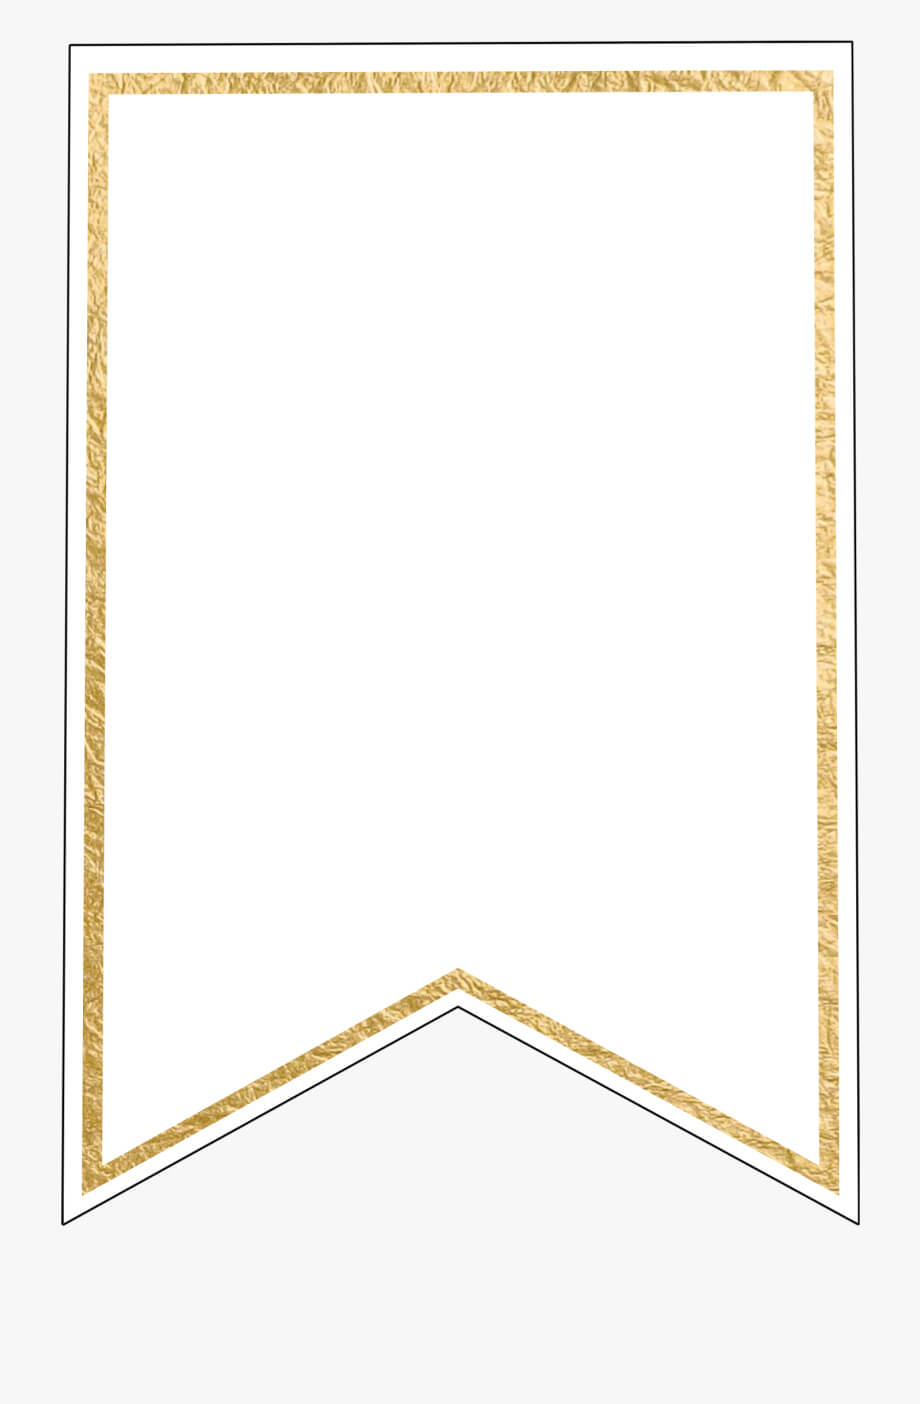 Free Pennant Banner Template, Download Free Clip Art, – Gold Regarding Printable Pennant Banner Template Free